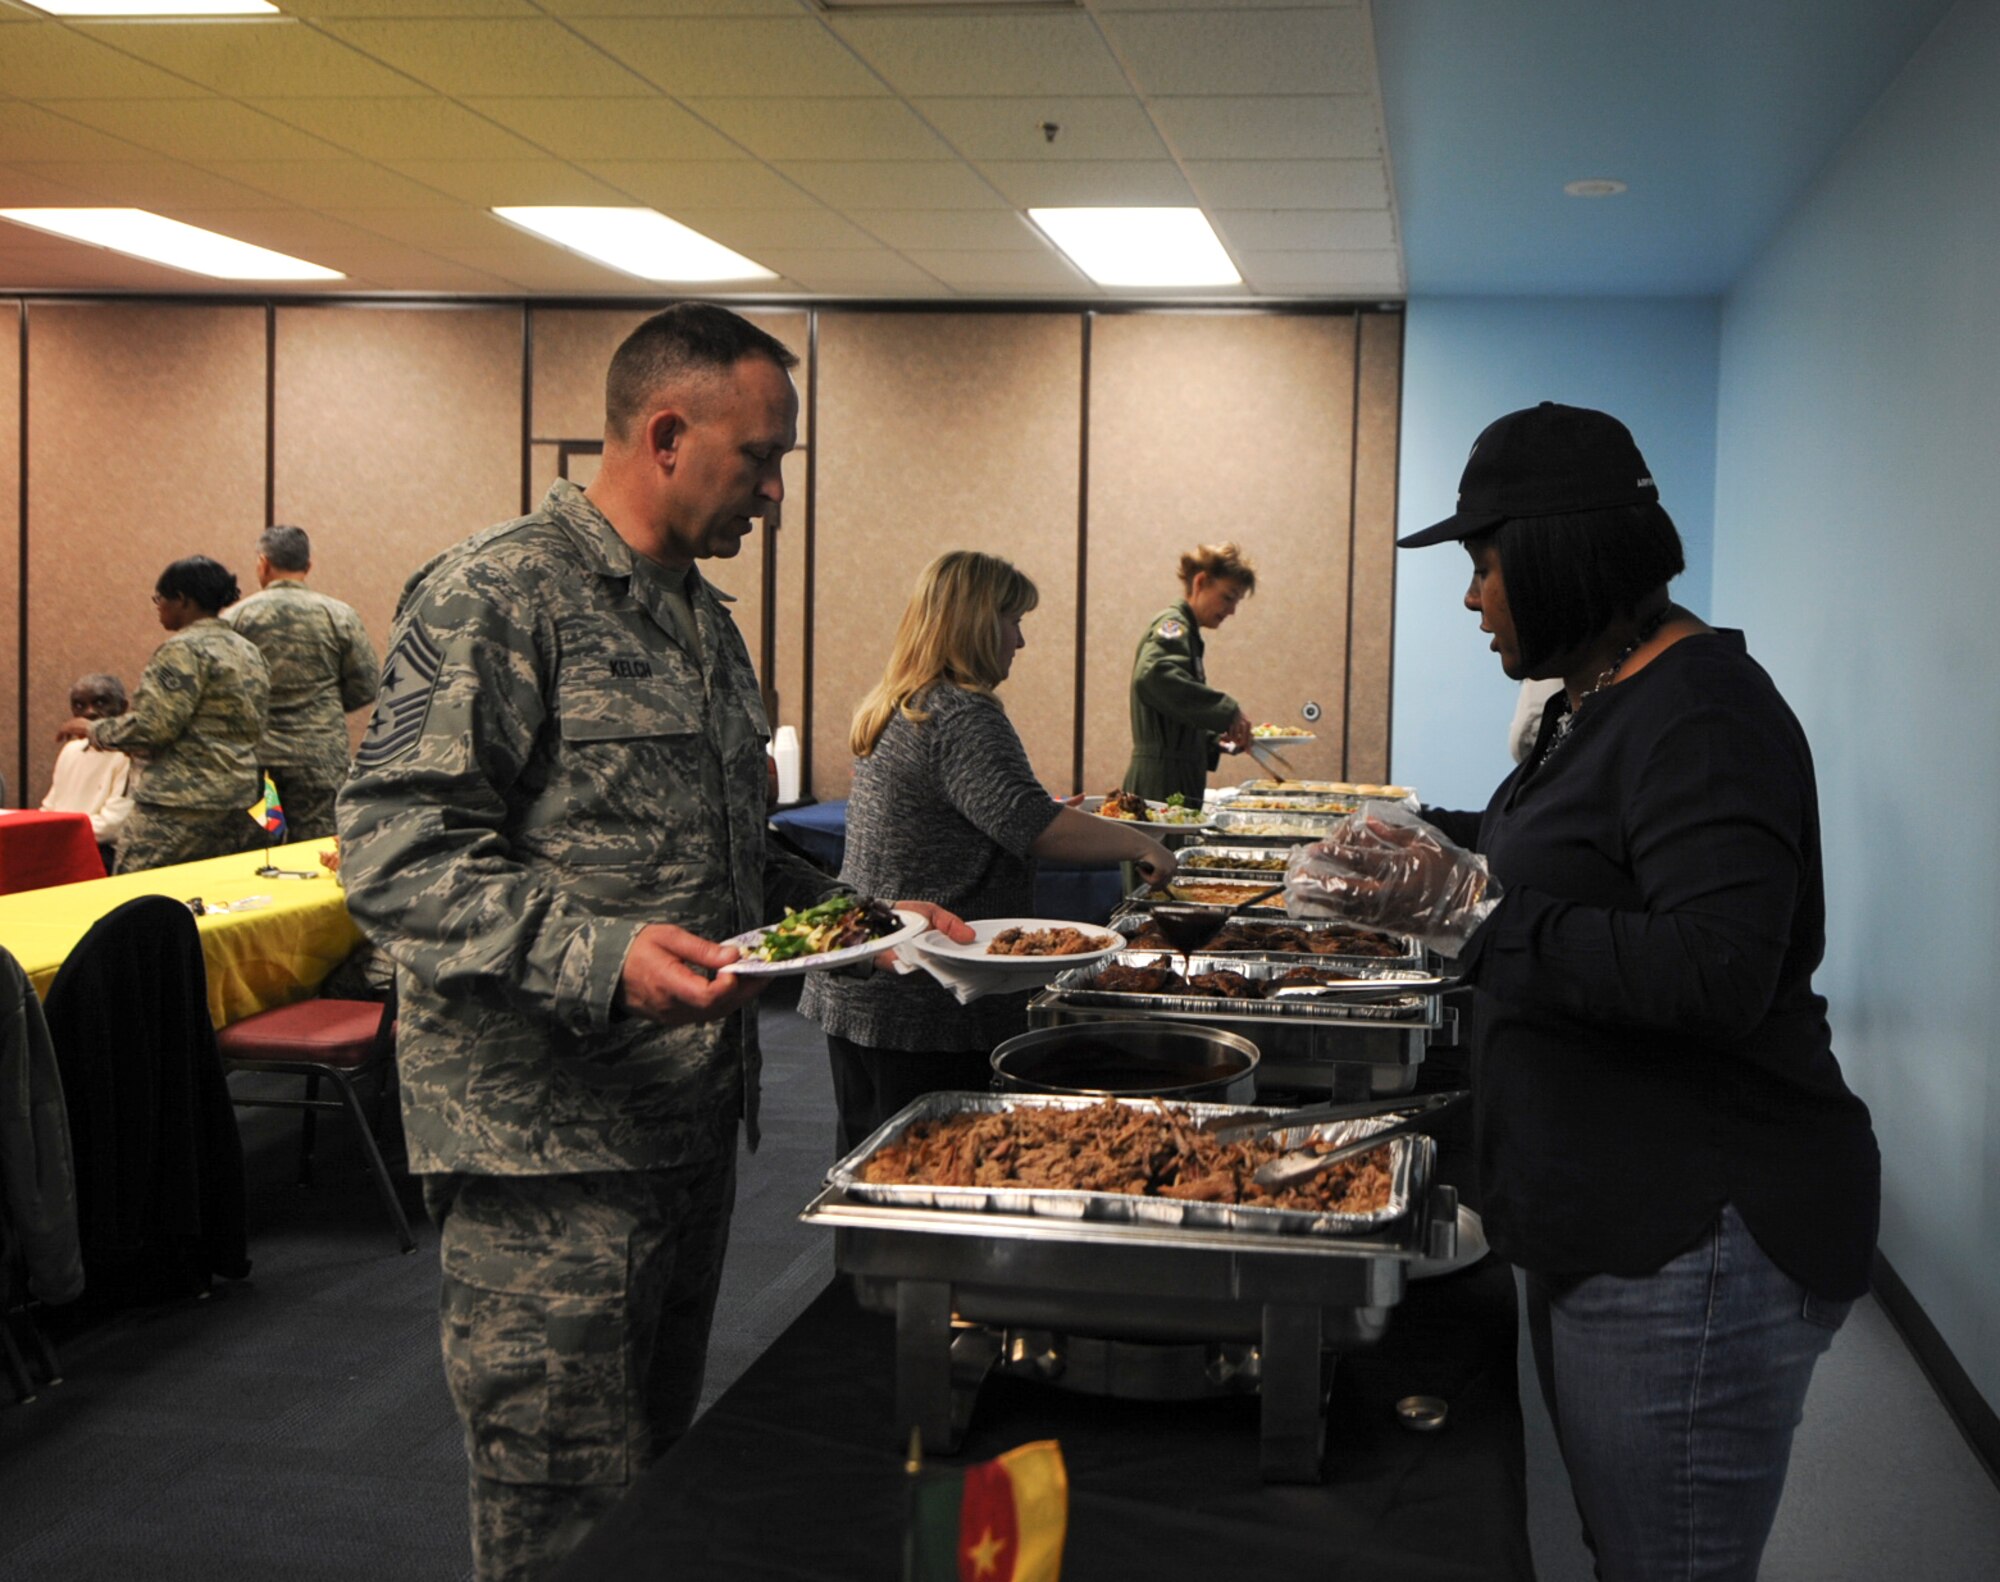 Onjel Gambrell, 23d Civil Engineer Squadron secretary, serves food to U.S. Air Force Chief Master Sgt. David Kelch, 23d Wing command chief, during the Black History Month luncheon Feb. 27, 2015, at Moody Air Force Base, Ga. Members of the Black History Month committee organized the luncheon to celebrate the month. (U.S. Air Force photo by Senior Airman Olivia Bumpers/Released) 